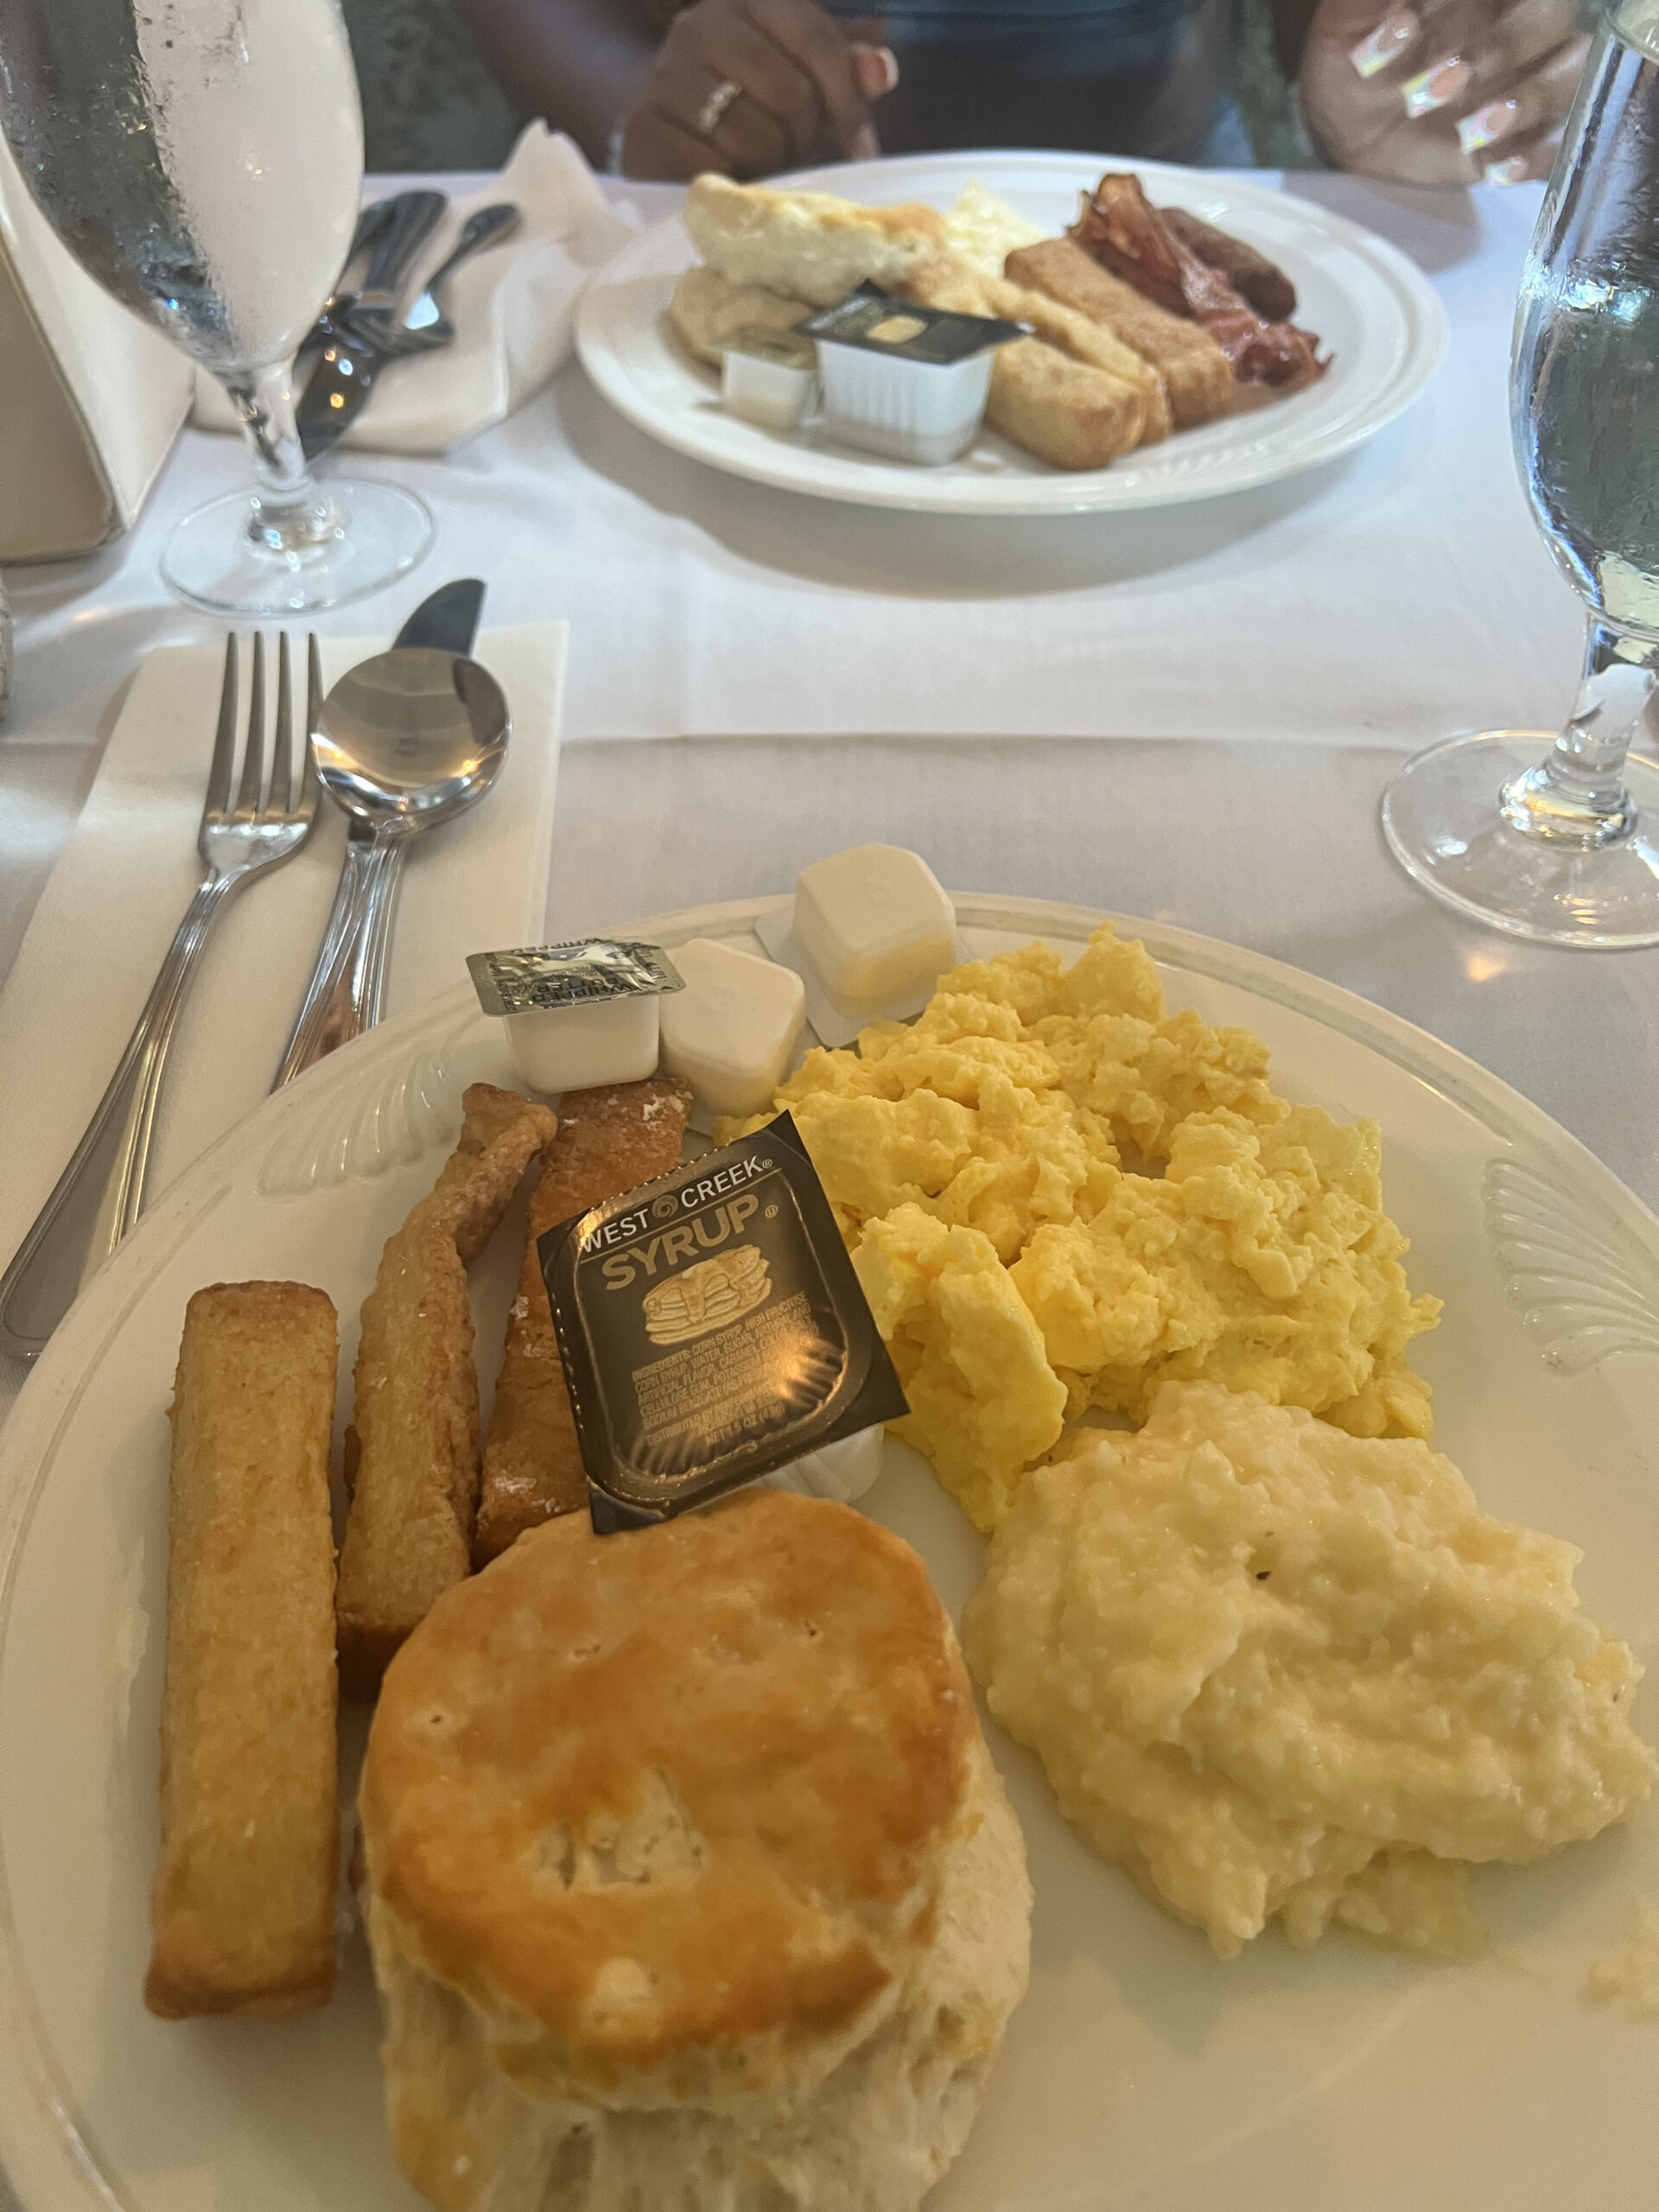 A breakfast plate with biscuit, eggs, and grits. 